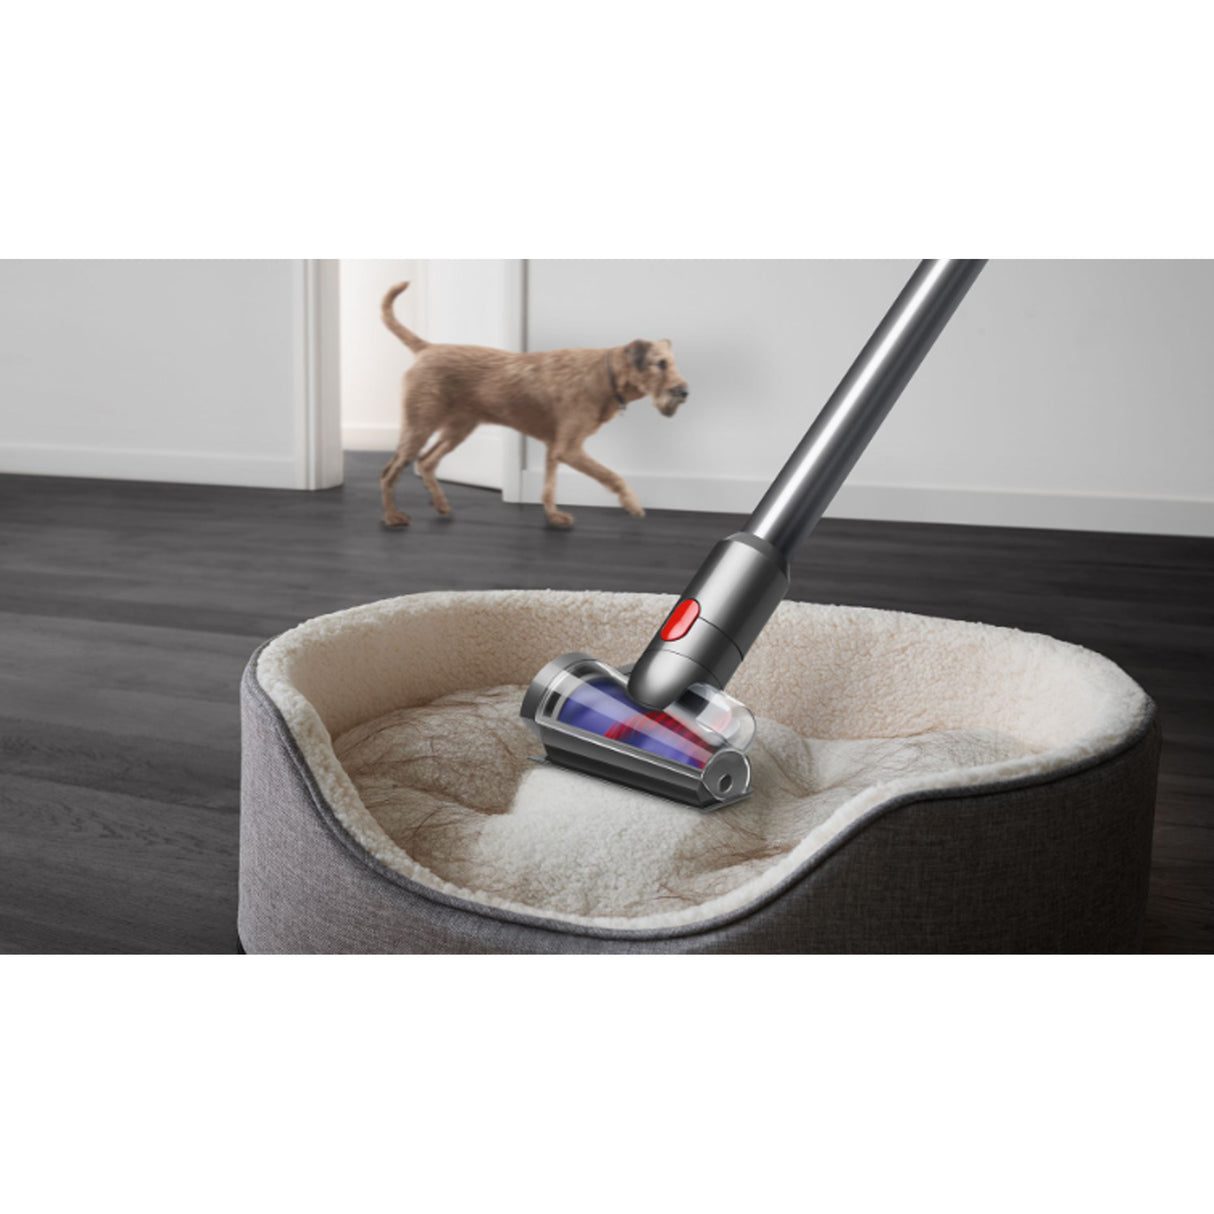 Dyson V15 Detect Detect Dry Vacuum Cleaner (Silver/Yellow)